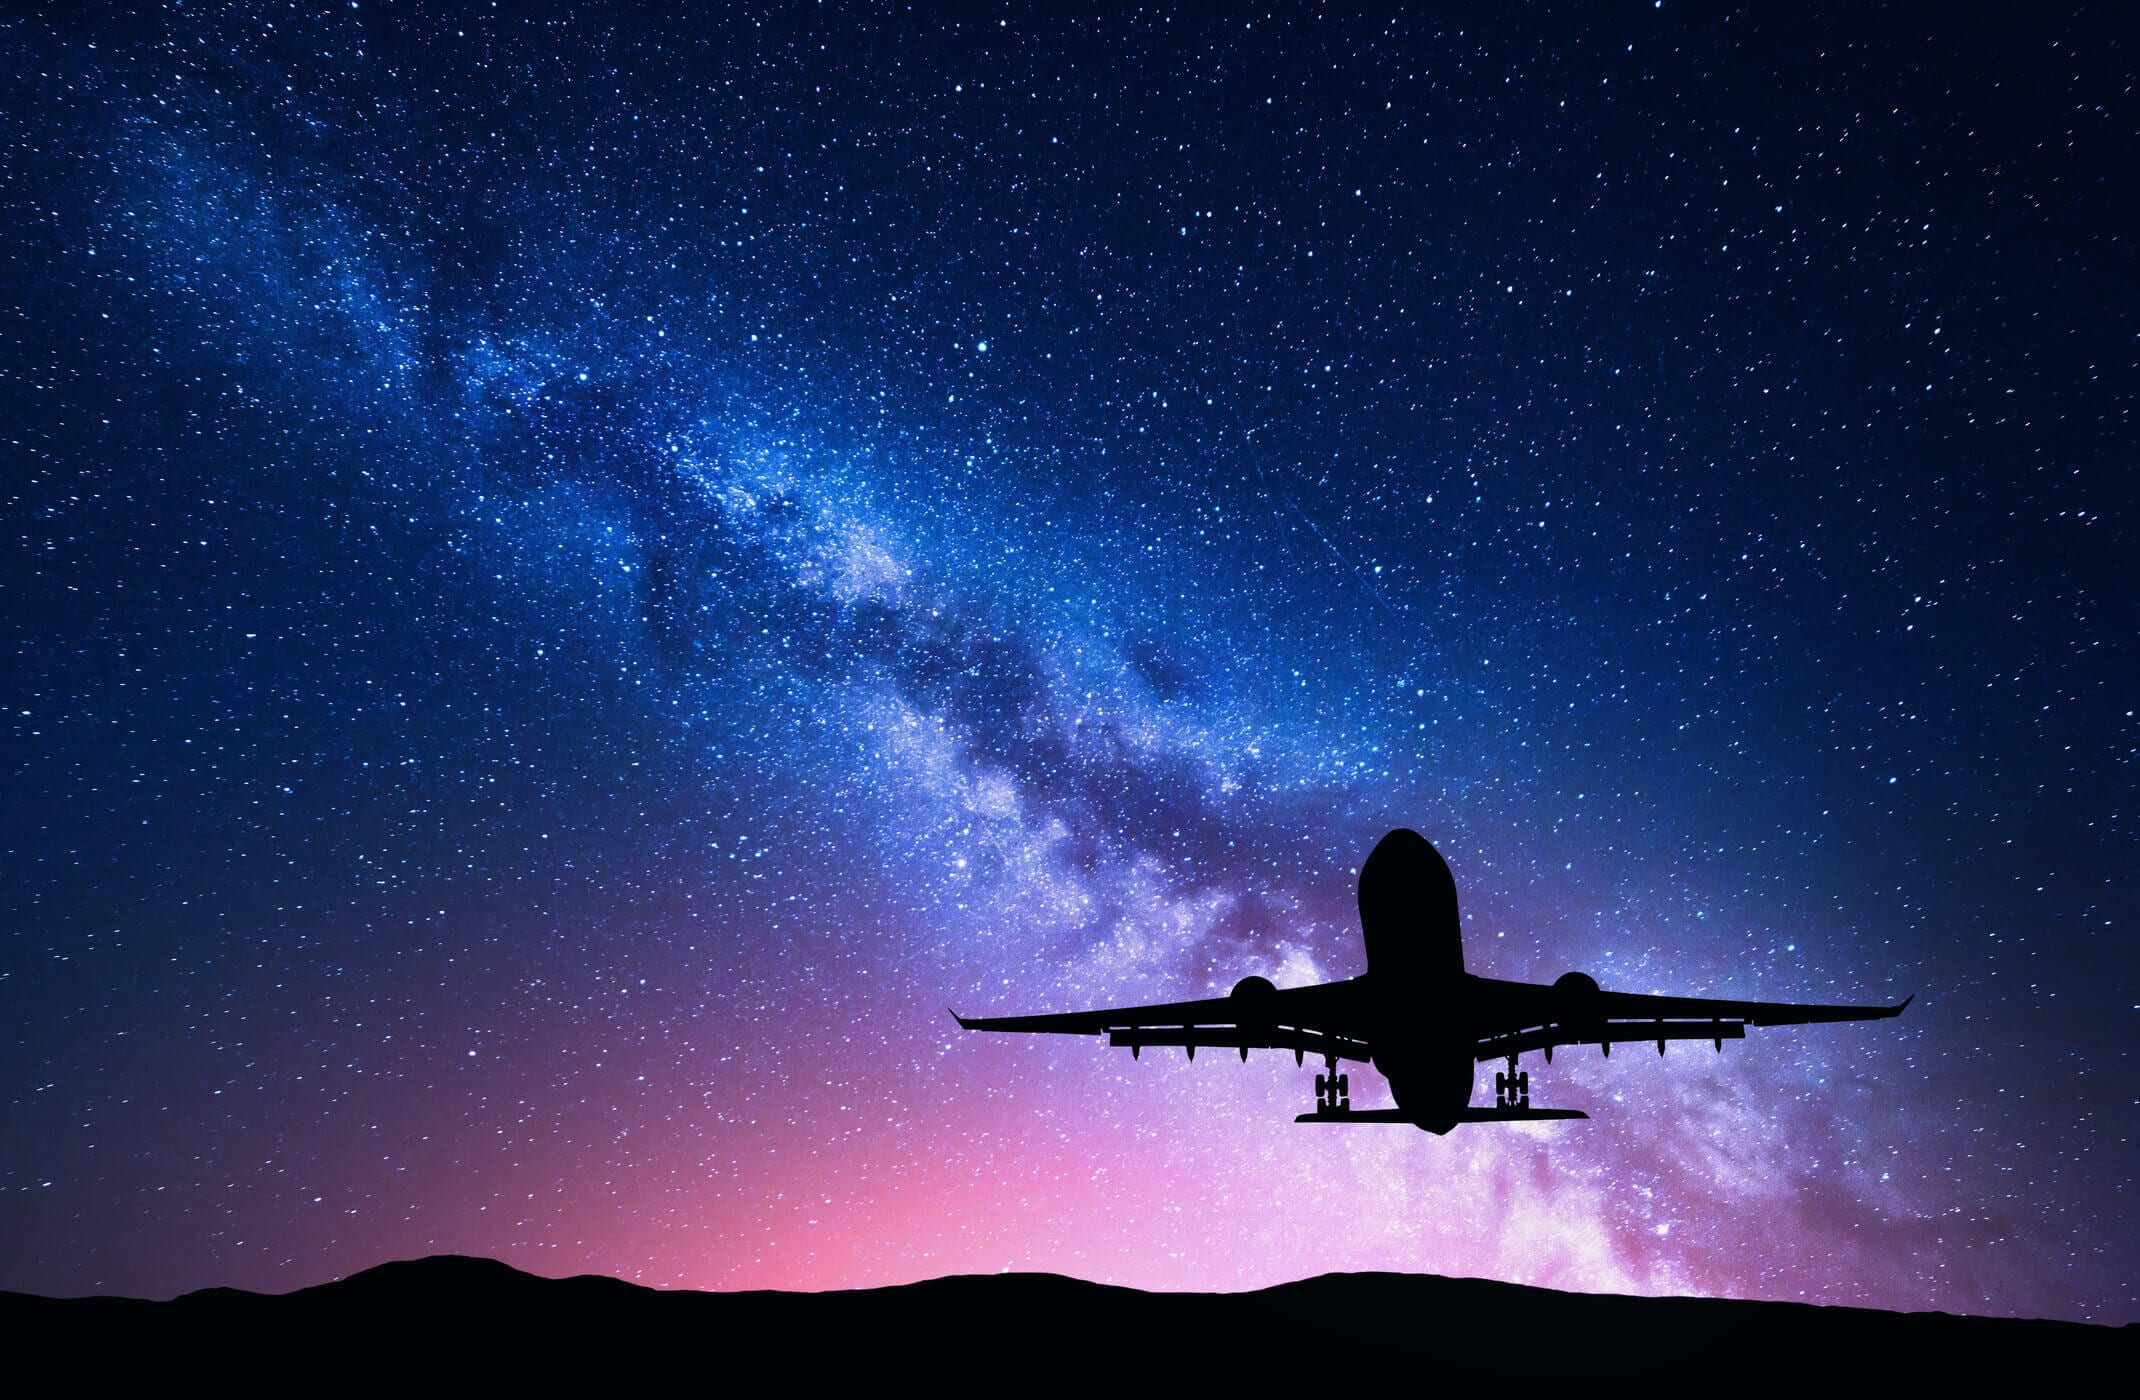 image of plane taking off in night sky